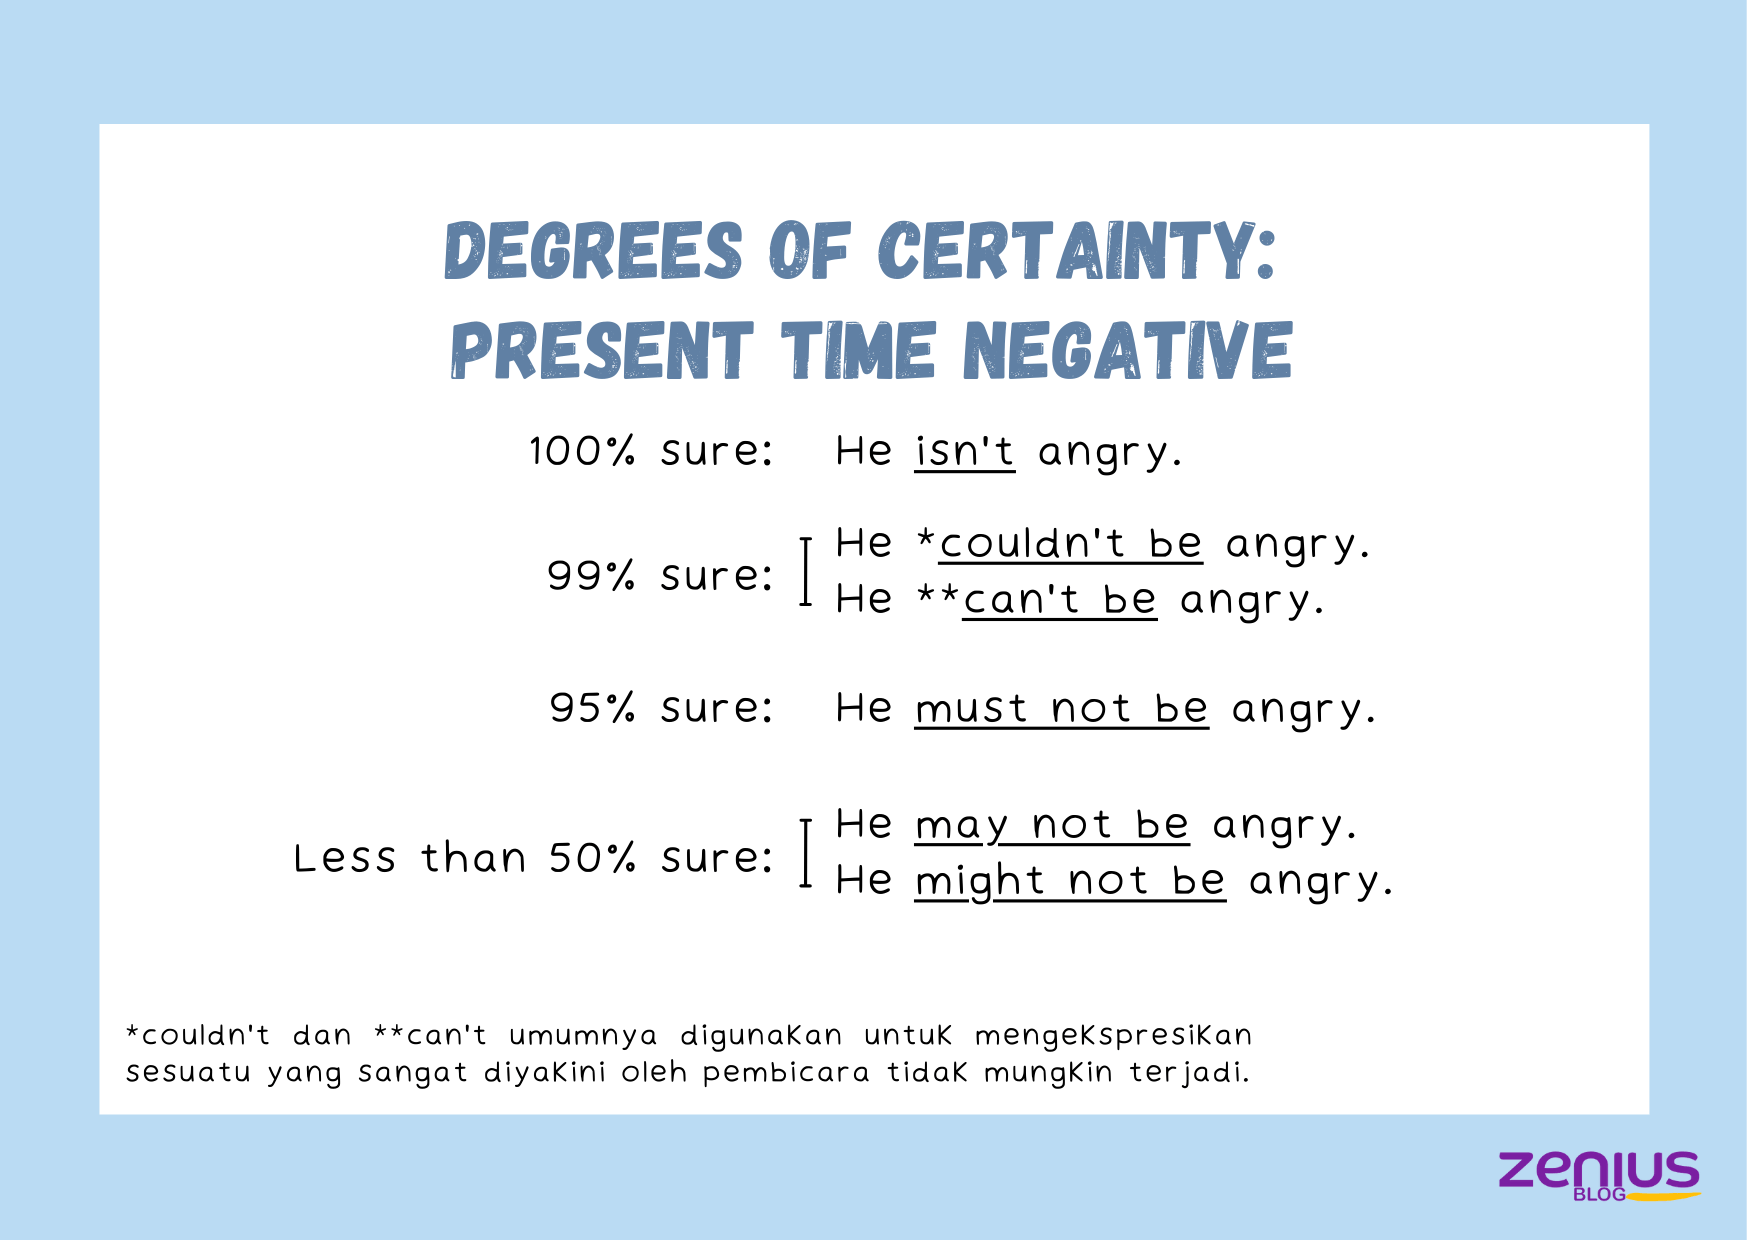 Making Prediction Degrees of Certainty Present Time Negative Zenius